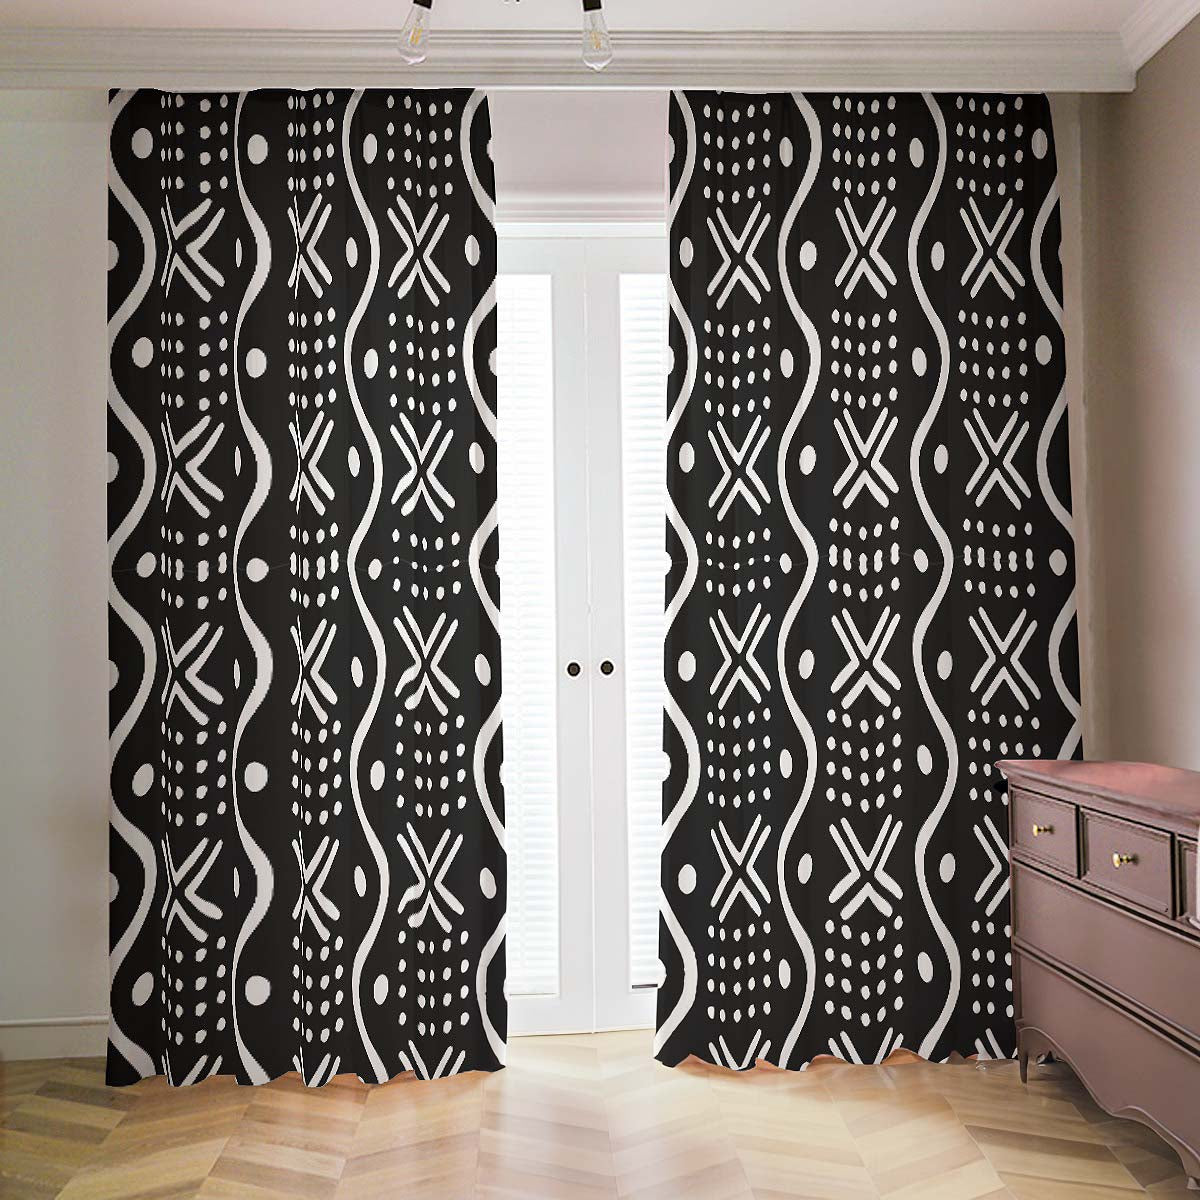 African Print Blackout Curtains Black & White (Two-Piece)